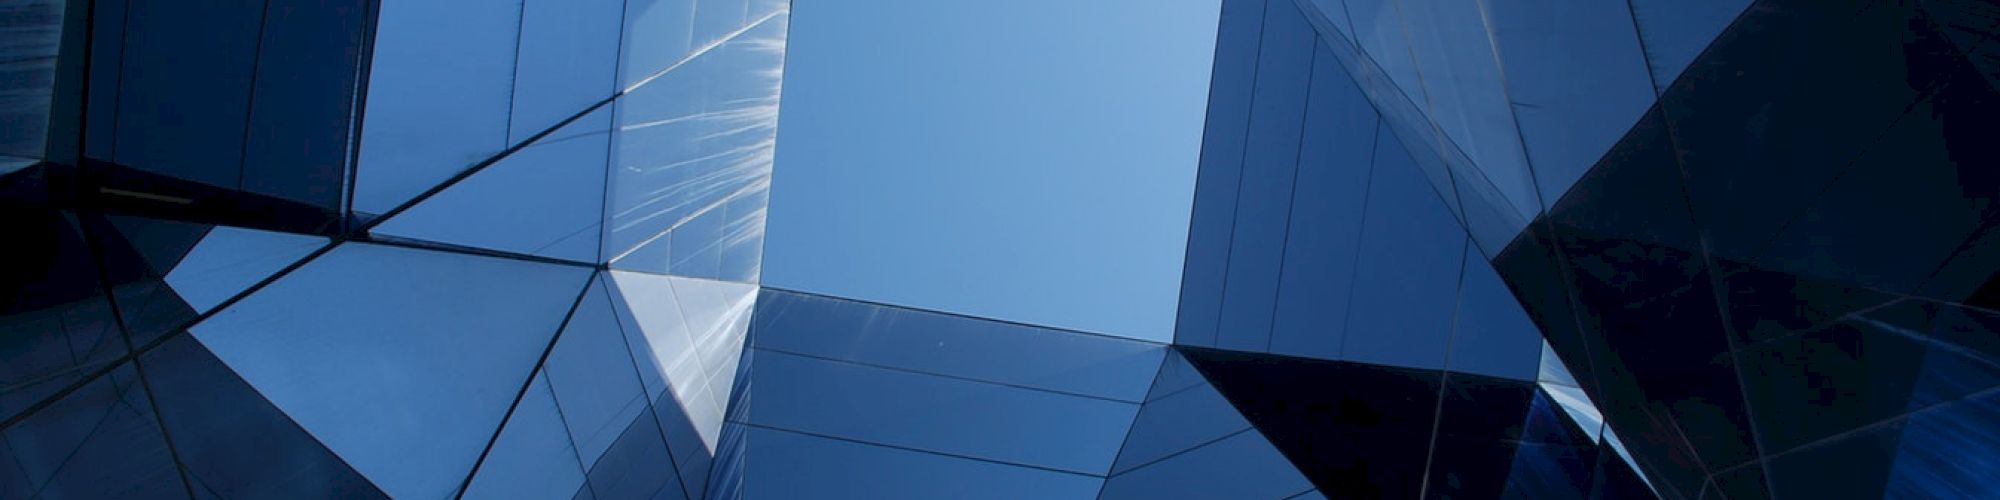 The image shows a geometric structure made of glass panels, forming an abstract and reflective pattern with a view of the sky at the center.